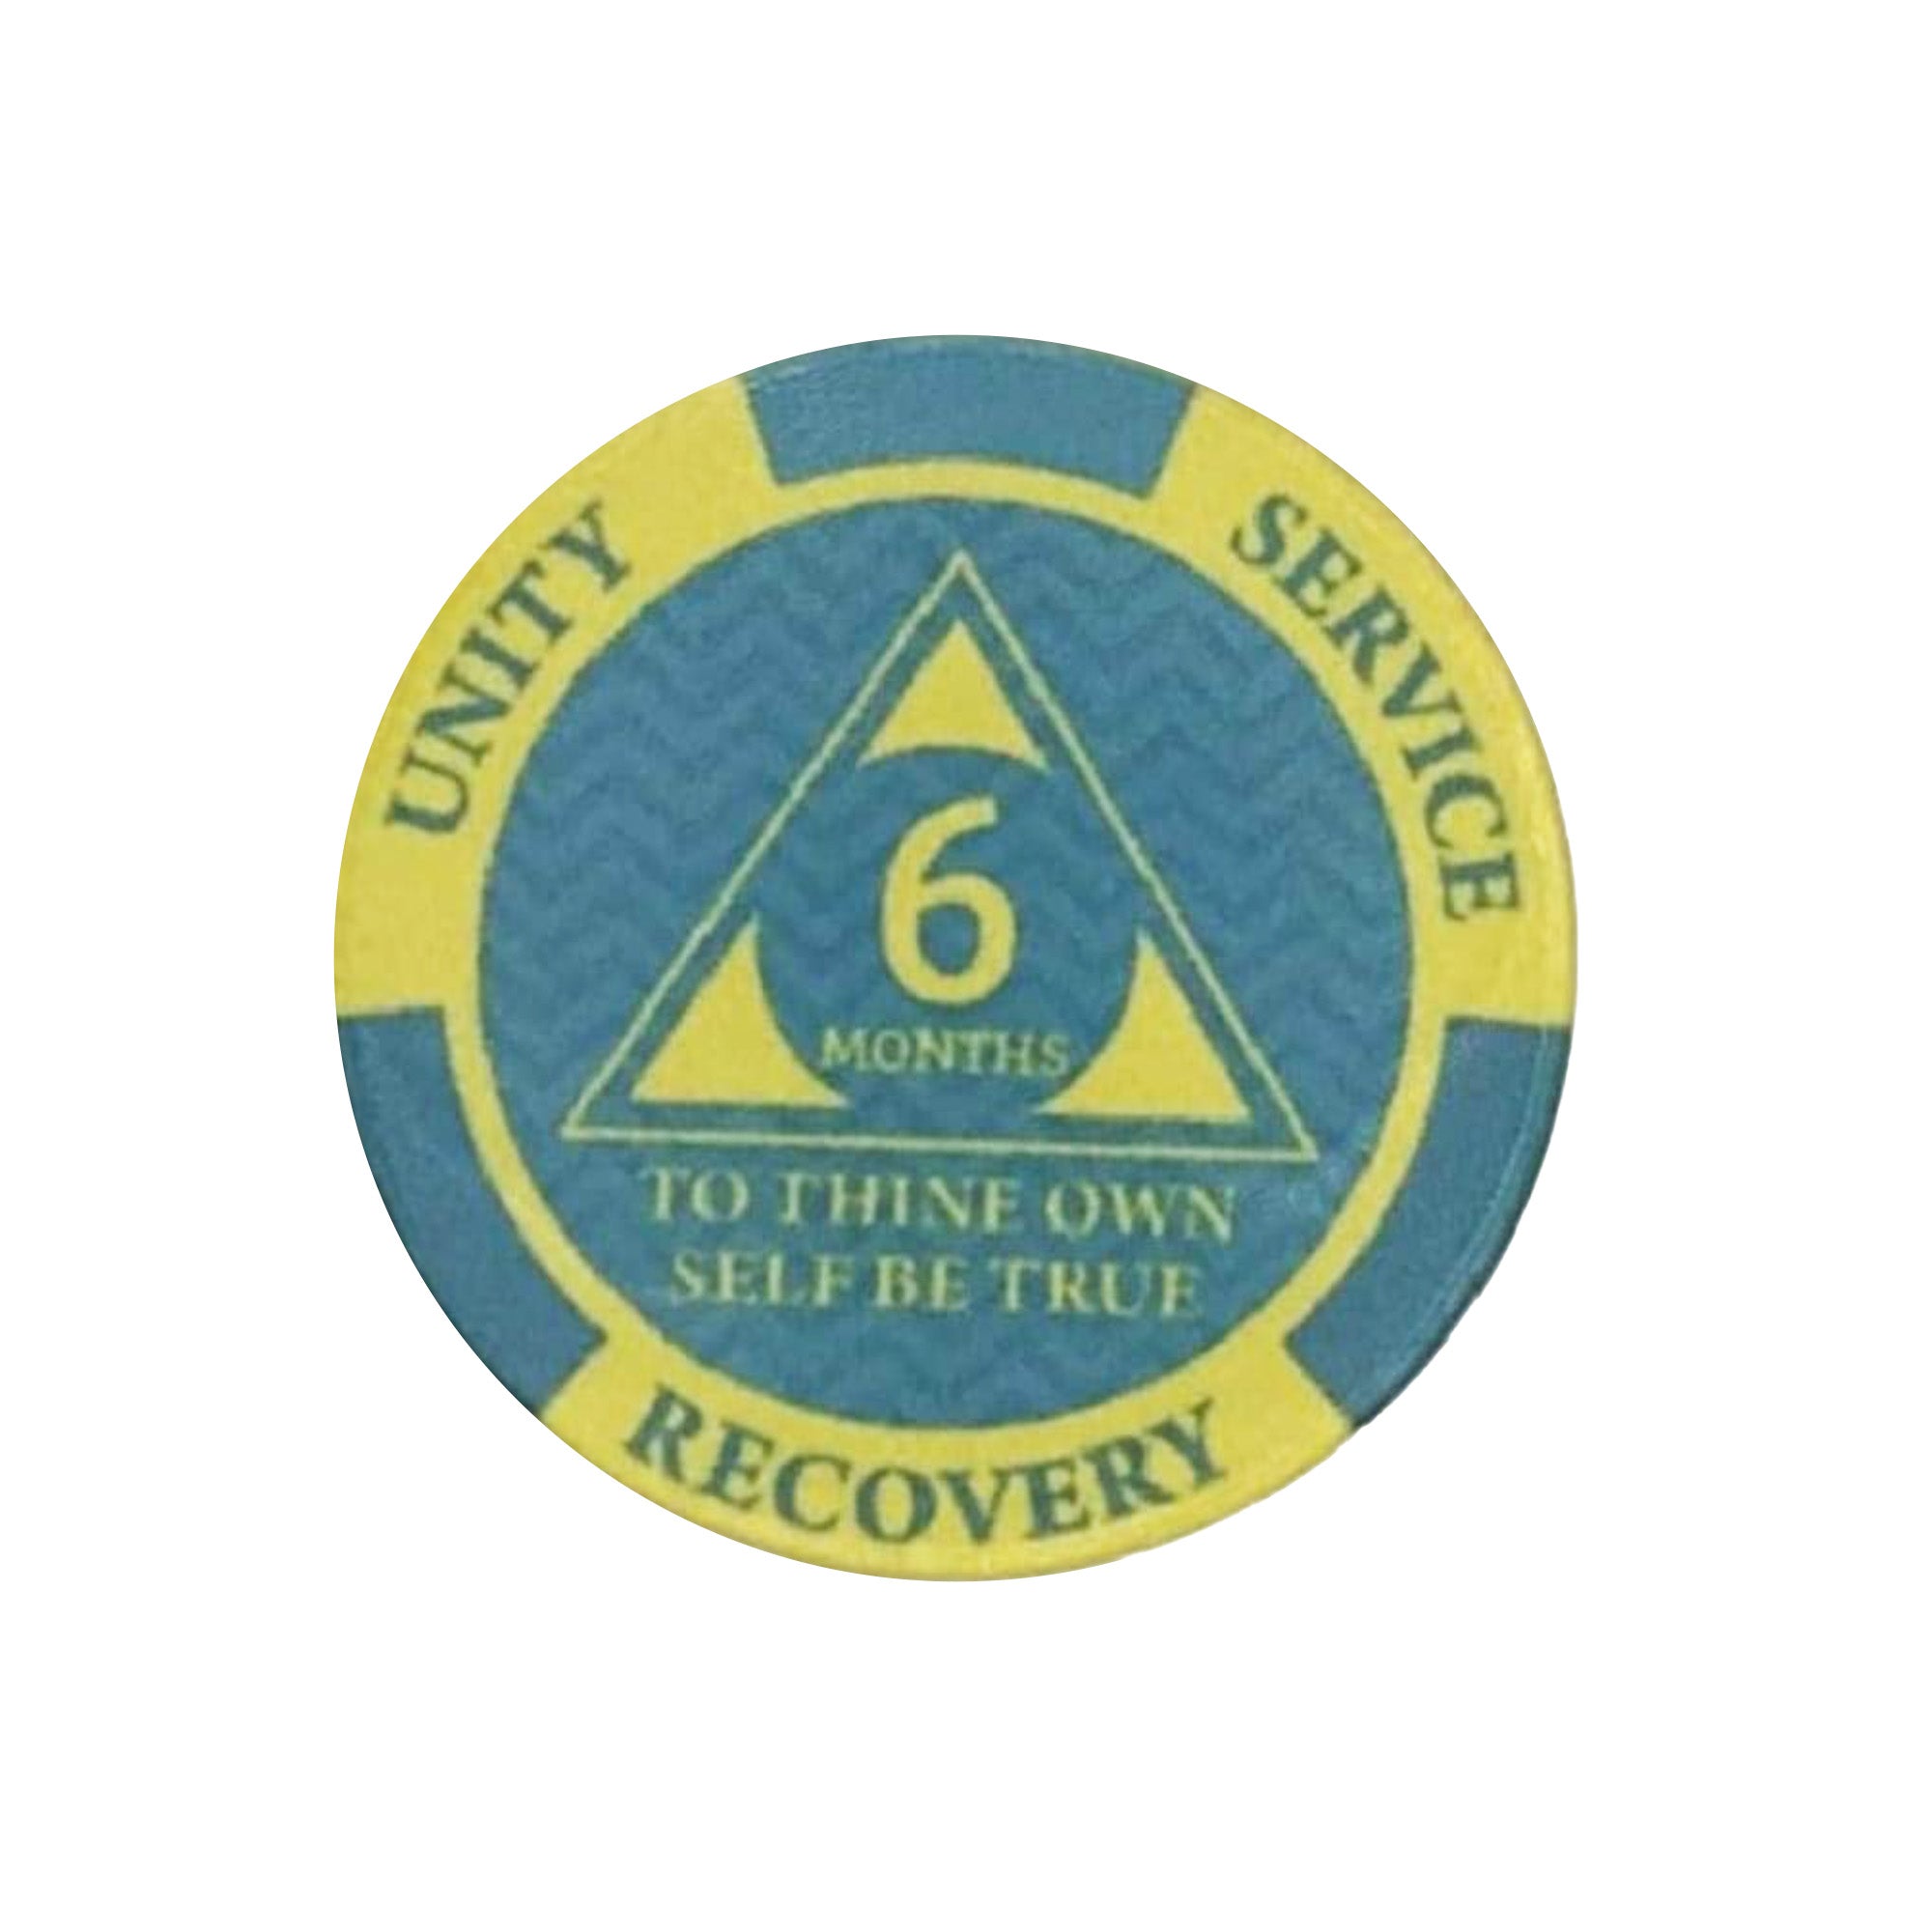 (12) Pack AA Monthly Poker Chips 24hr Newcomer 1-11 Months AA 1 Month Chip up to Alcoholics Anonymous 11 Months